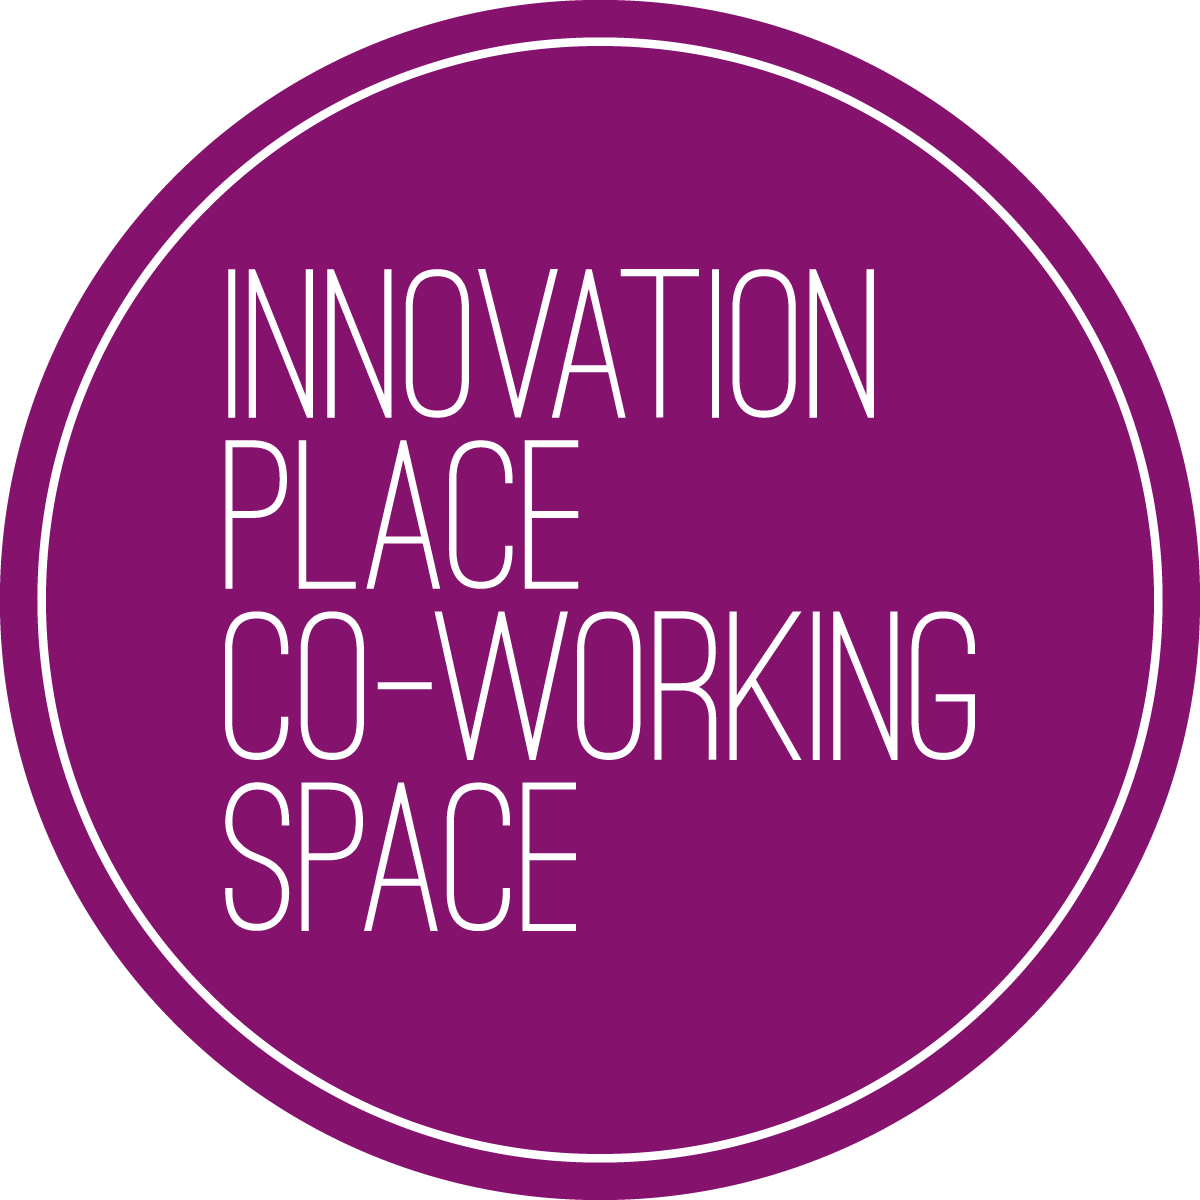 Innovation Place Co-Working Space